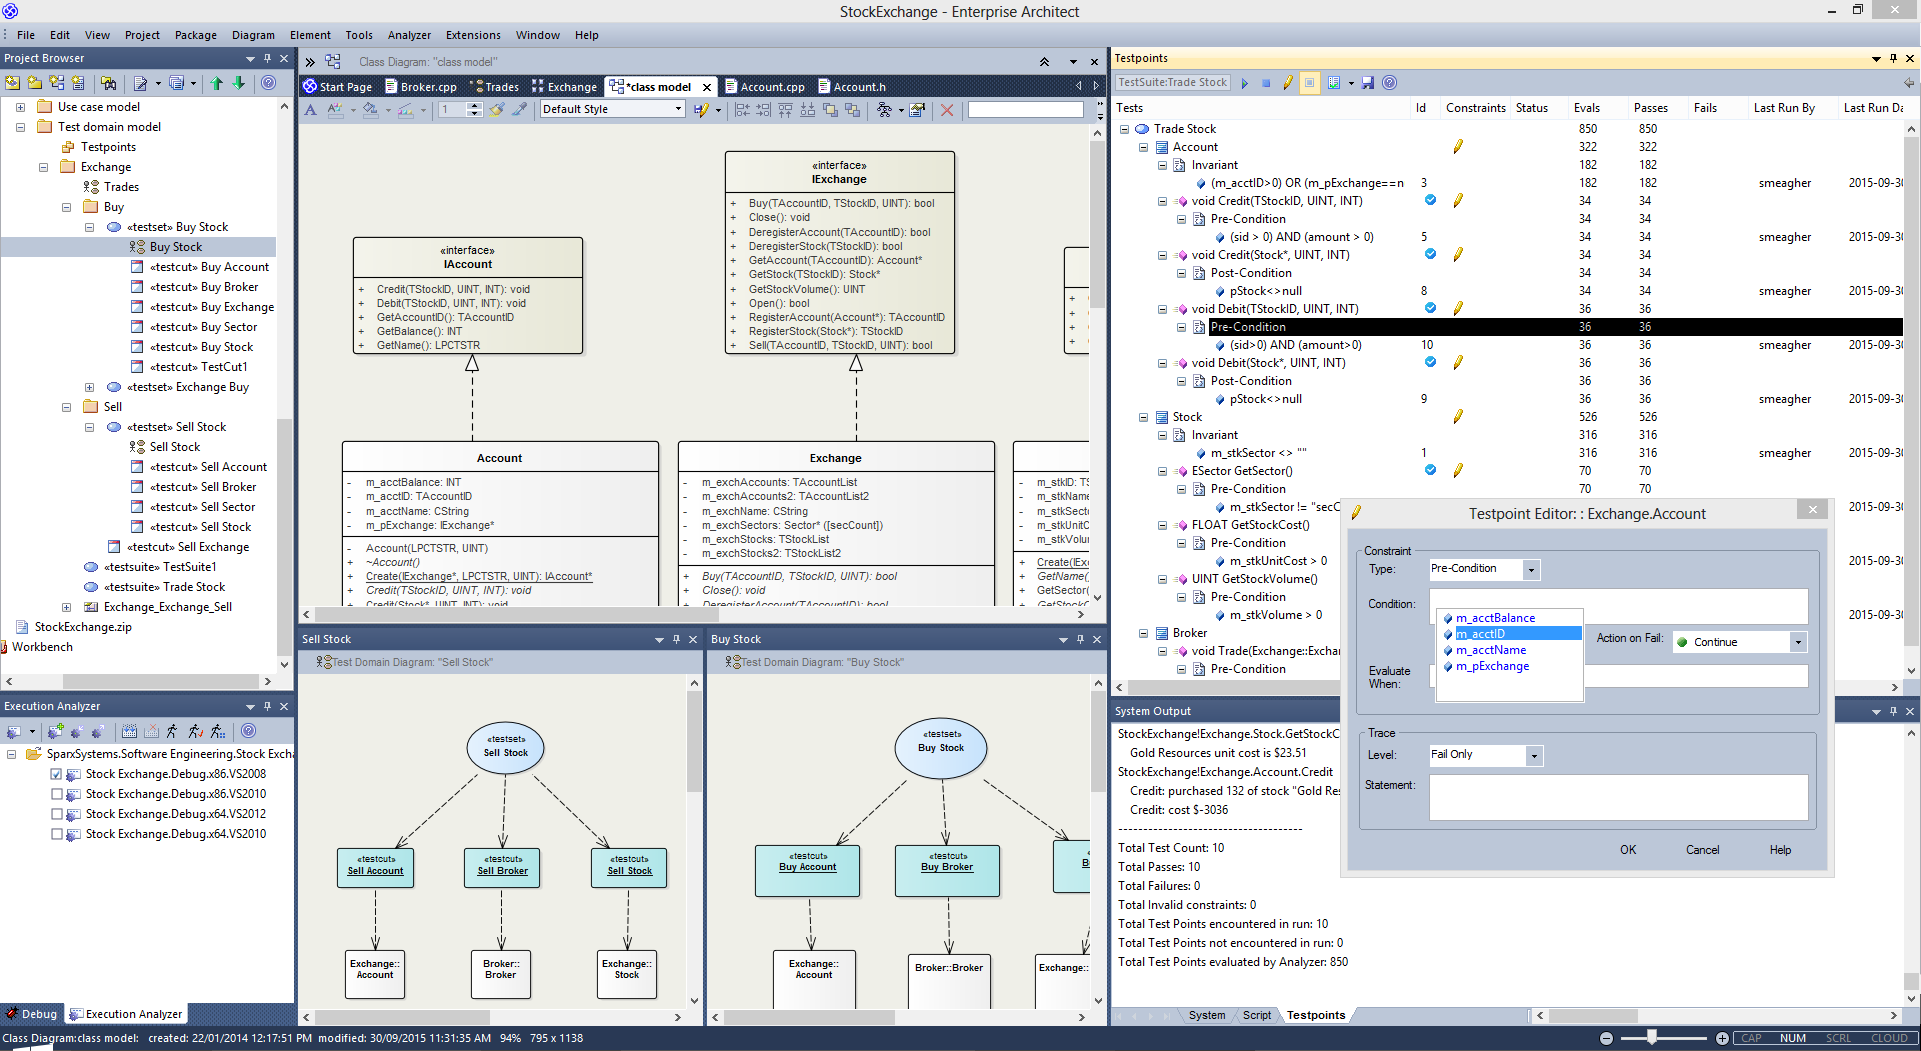 The image below shows the rich tapestry of features available in Enterprise Architect's test domain model, a dynamic medium providing runtime visualization of test case execution